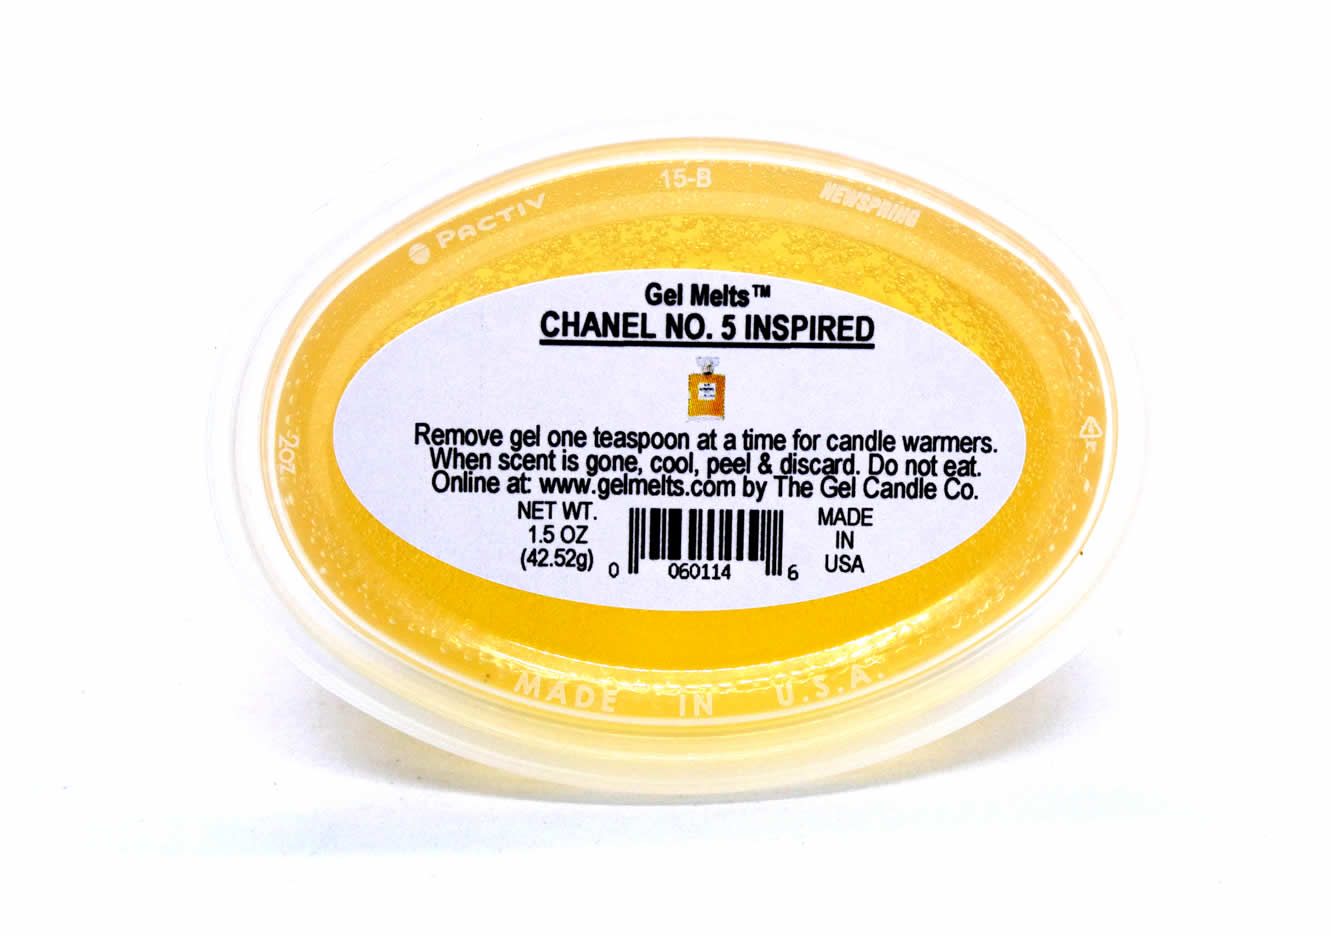 Chanel No. 5 Inspired Scented Gel Melts™ for warmers 3 pack - Click Image to Close